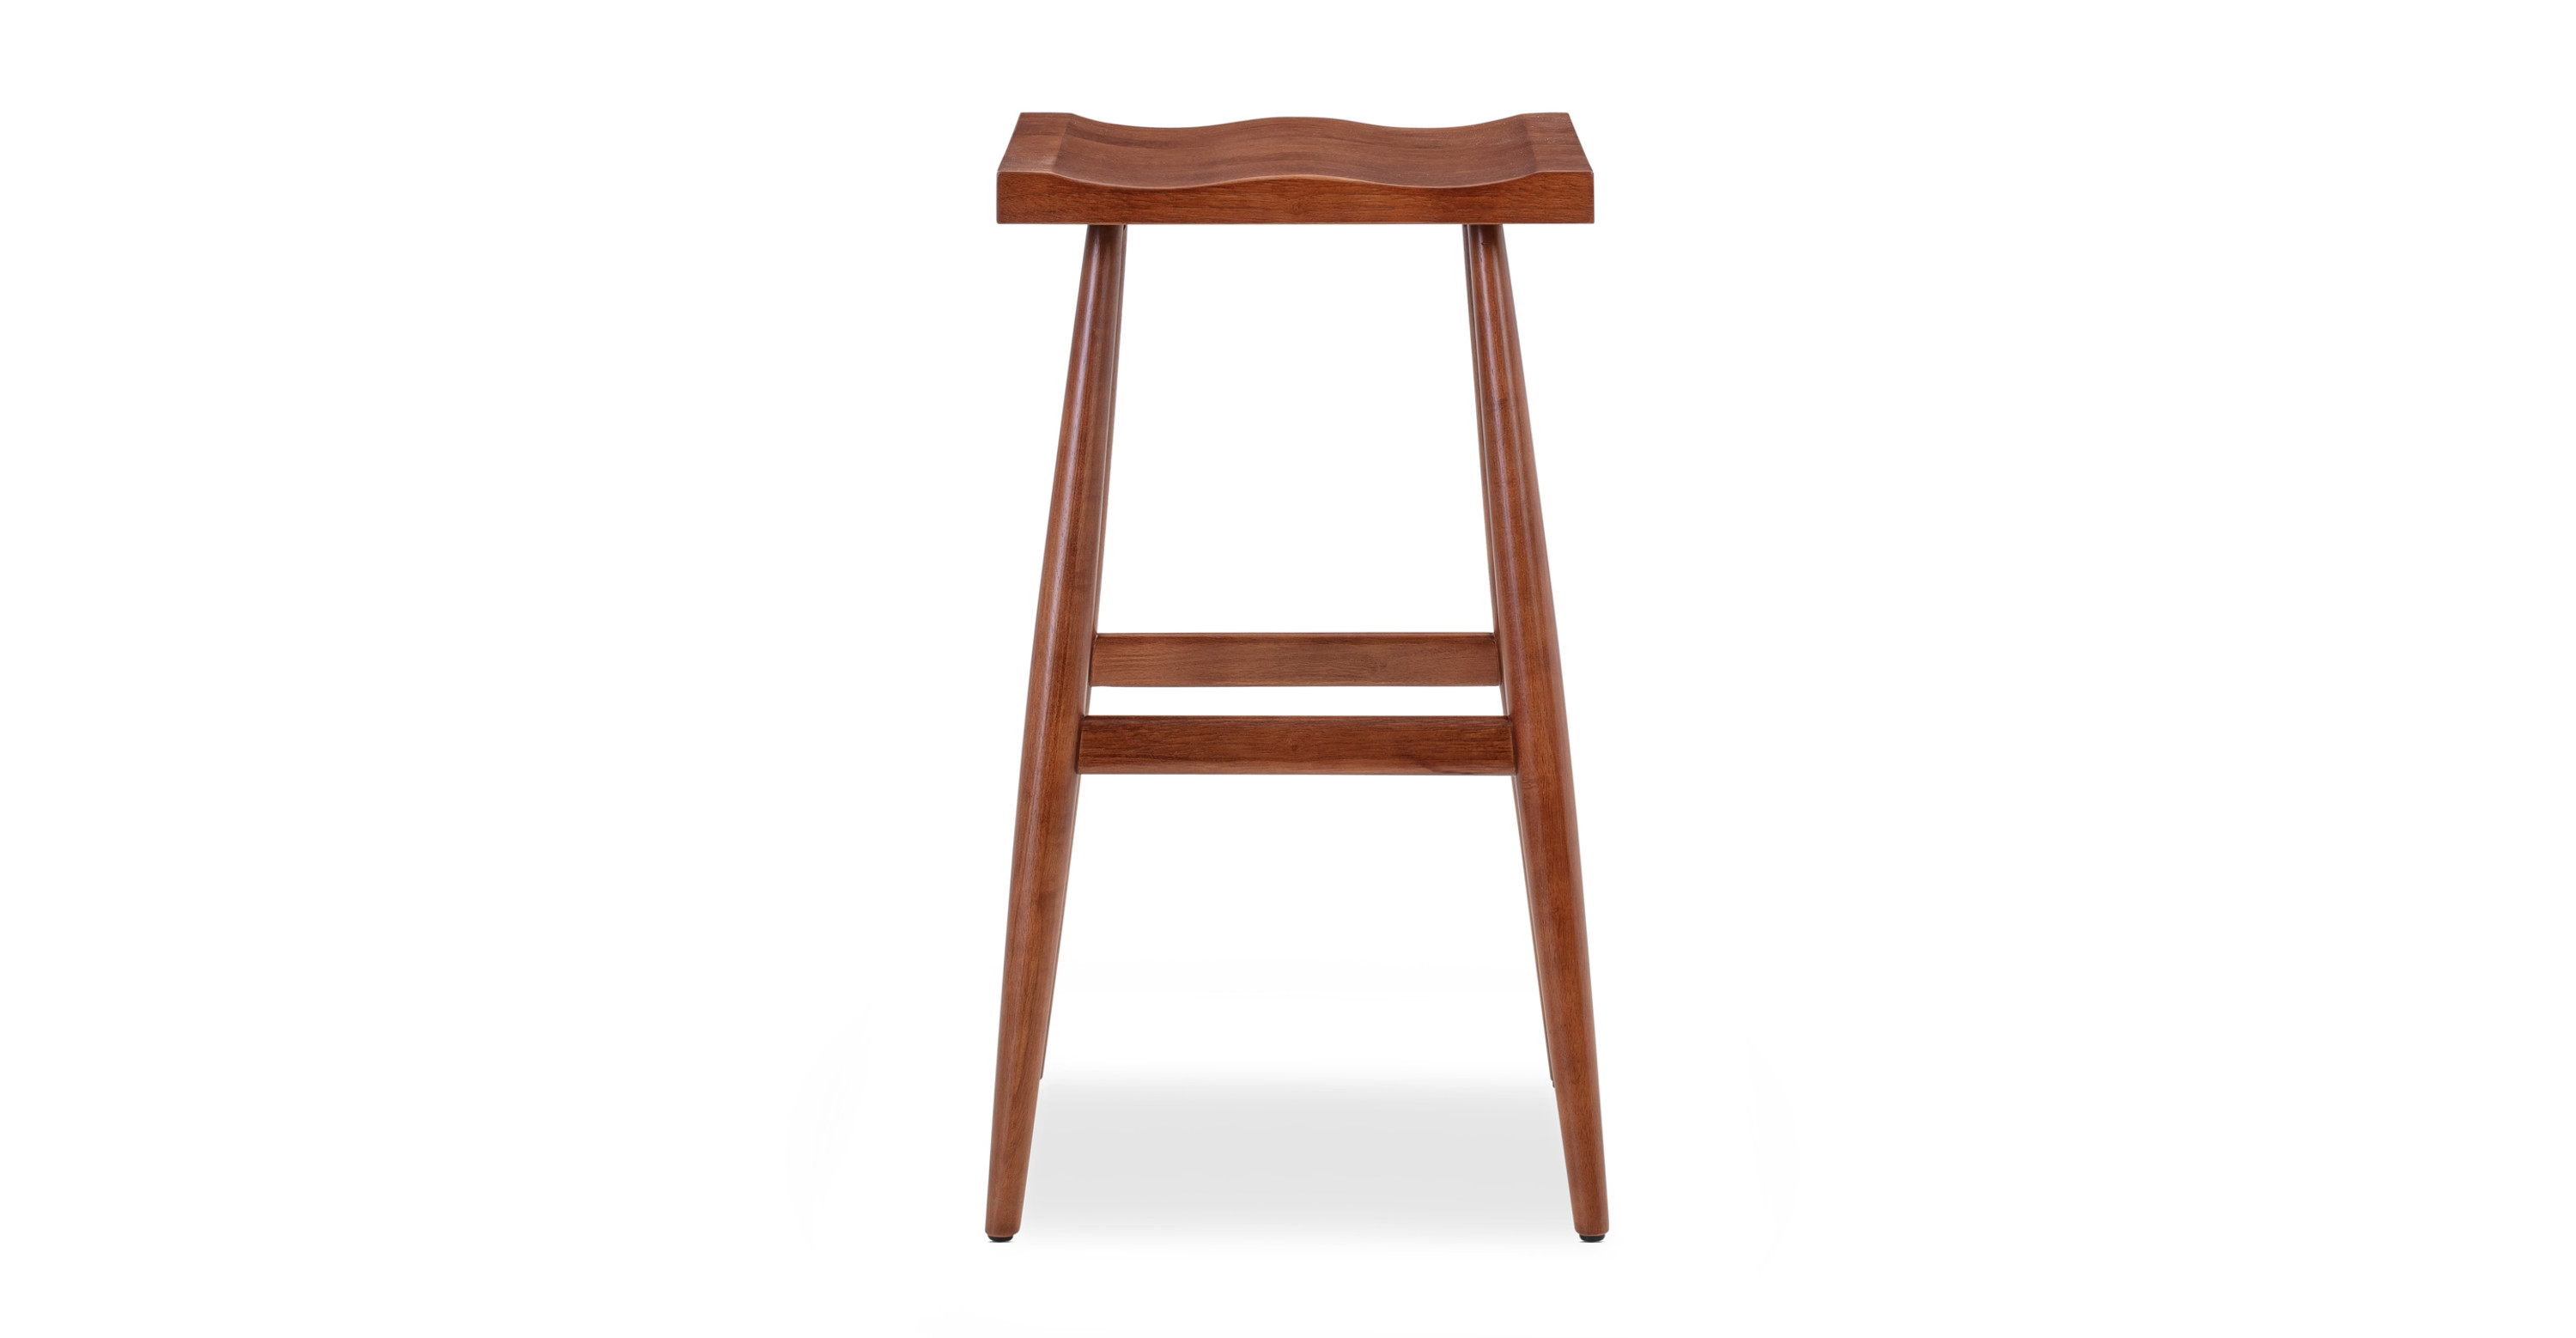 Wood stool seat replacement Wooden Stool Seat Replacement Bar Stool Seat  Chair Seat Replacement Stool Seat Top